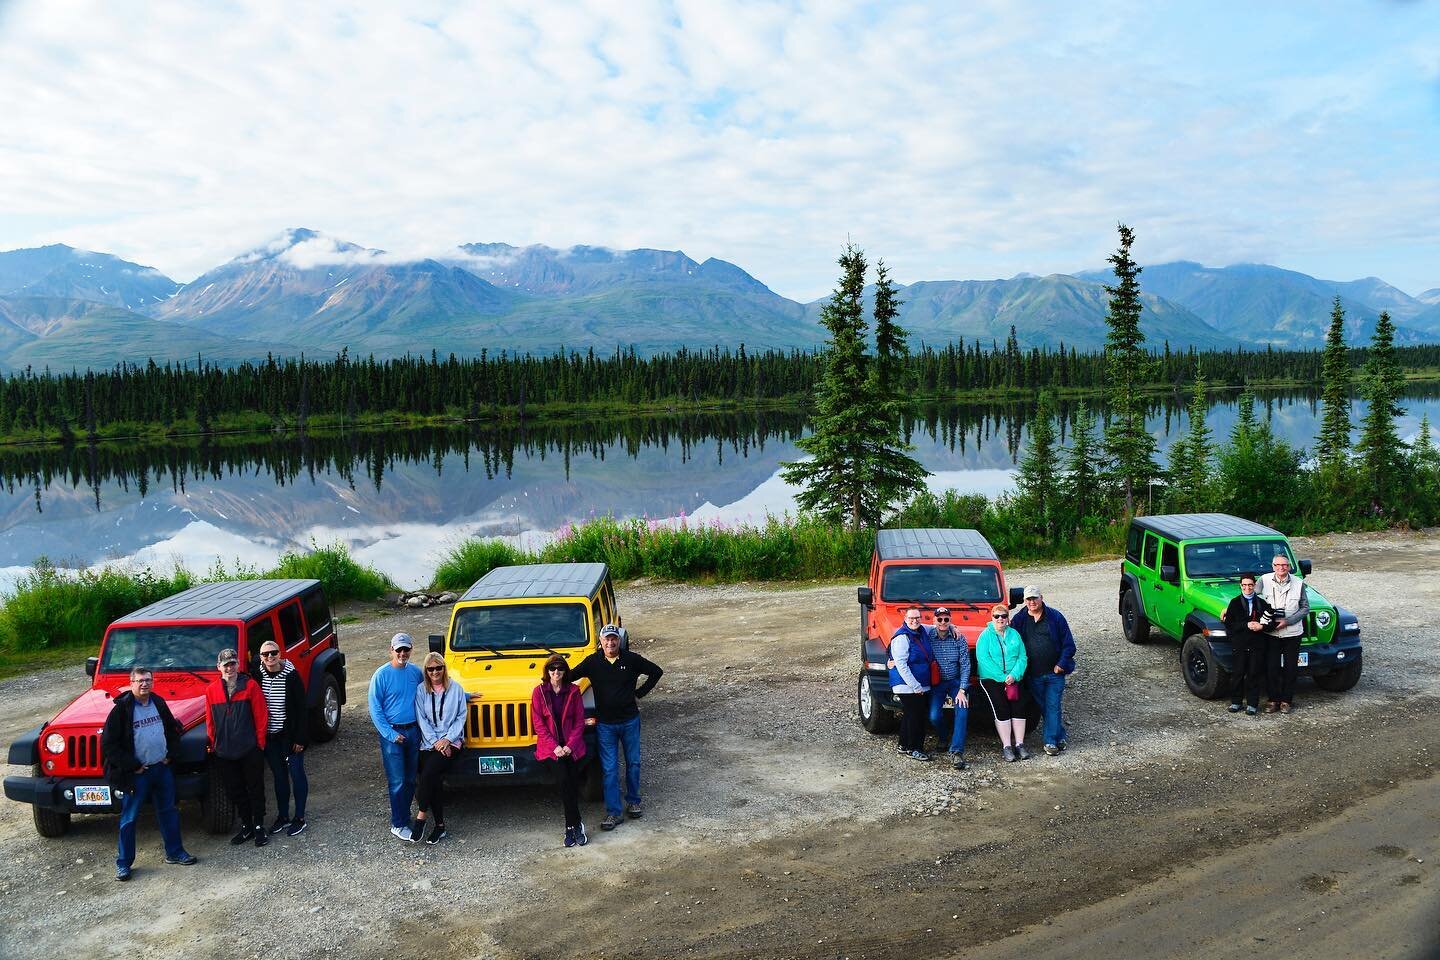 Opening week!! Jeep rentals start tomorrow, May 15th and Denali Highway Jeep tours start Friday, May 19th! We can&rsquo;t wait to see you cruise around in a Jeep this summer! 🤩😍